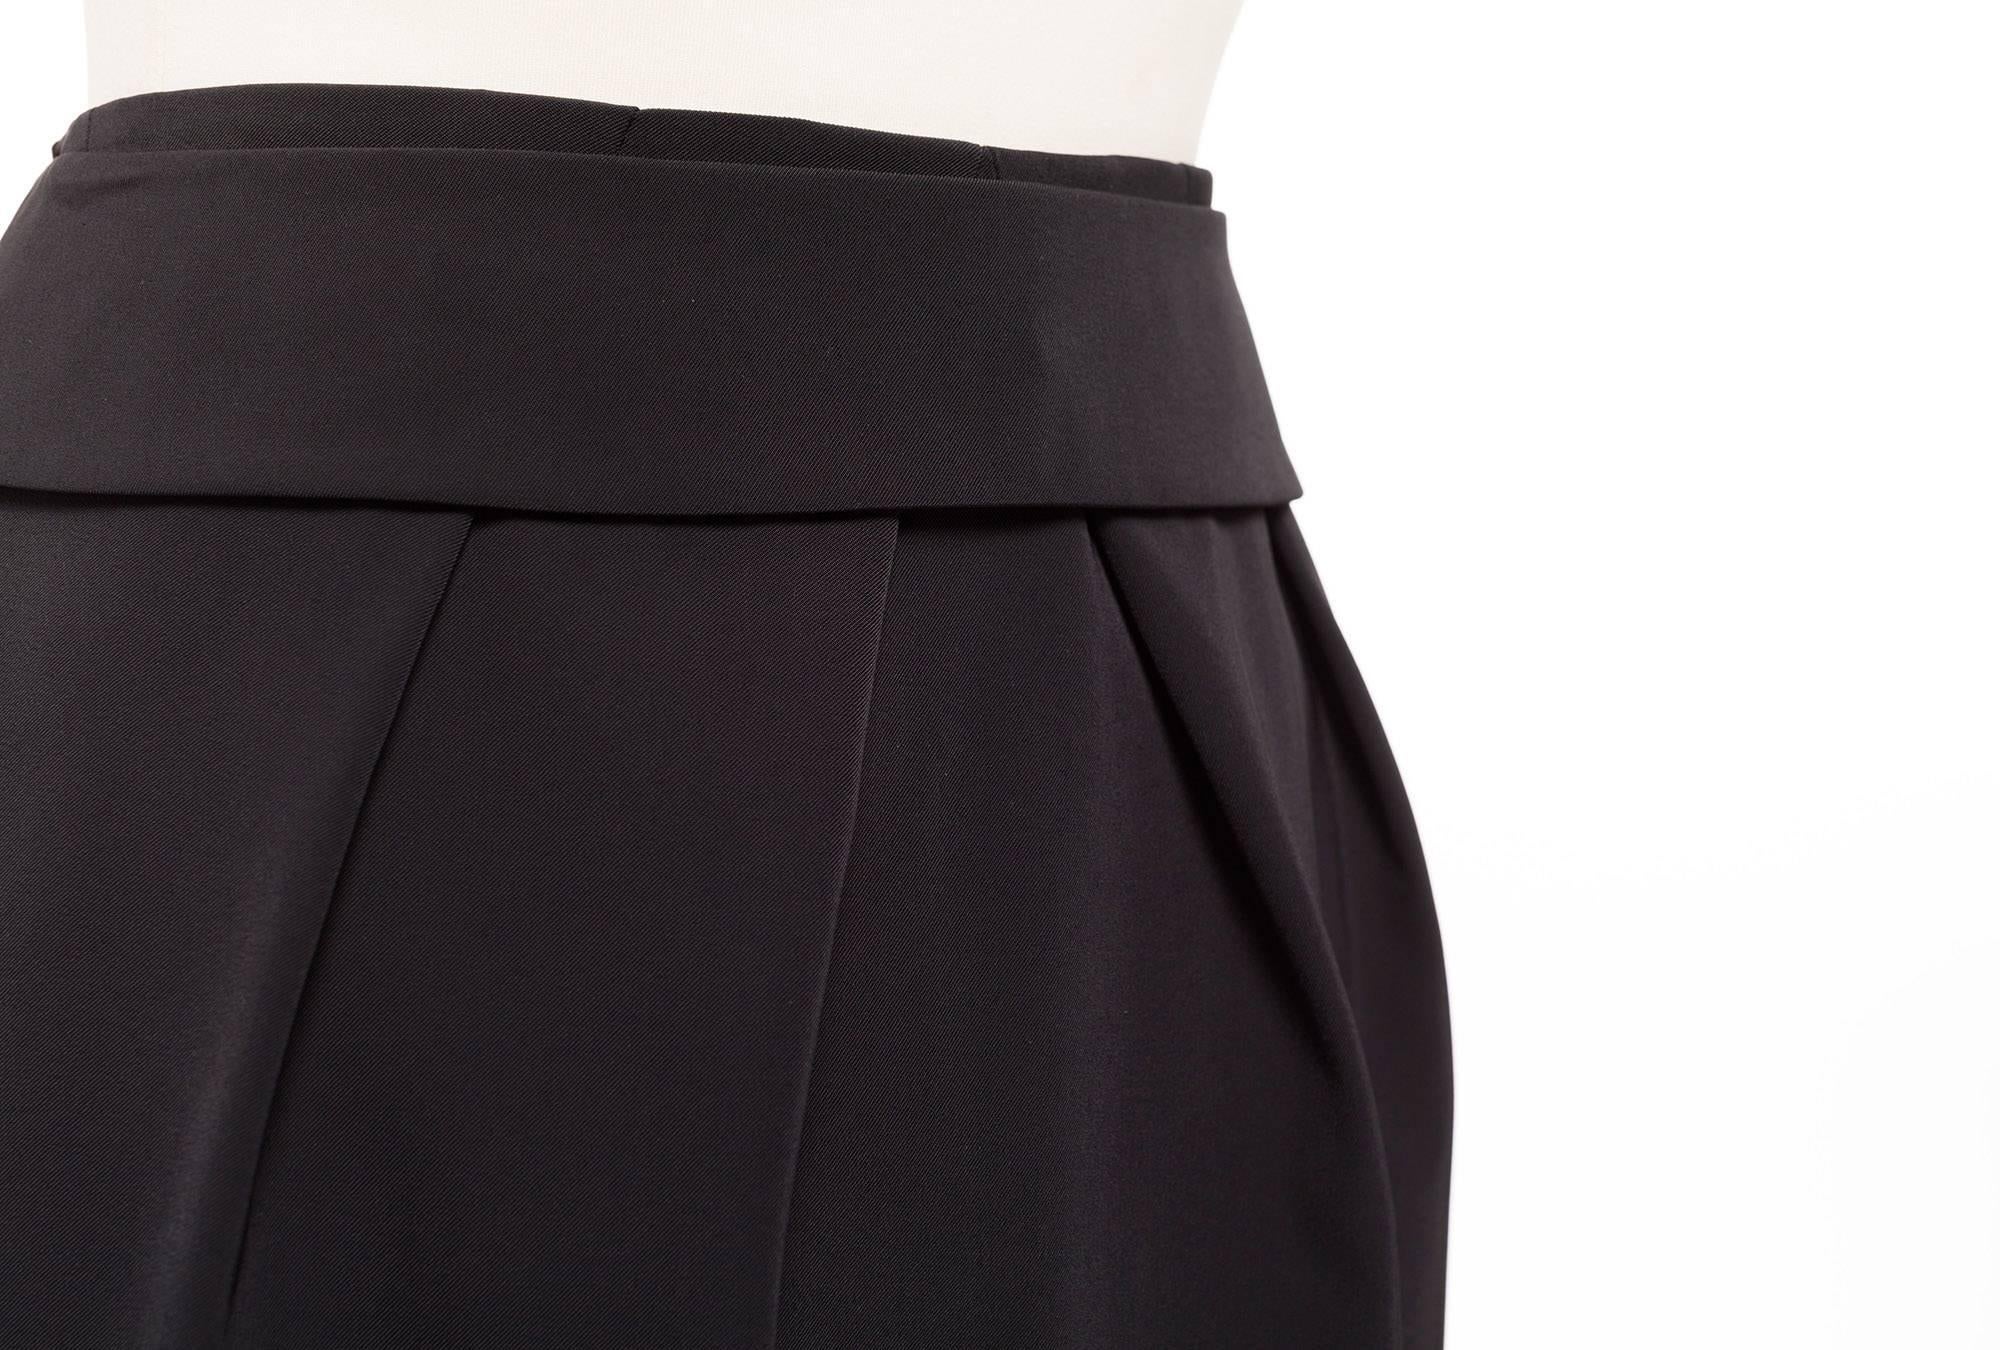 90's Prada vintage skirt with large front pleats, Sz. 4 For Sale 2